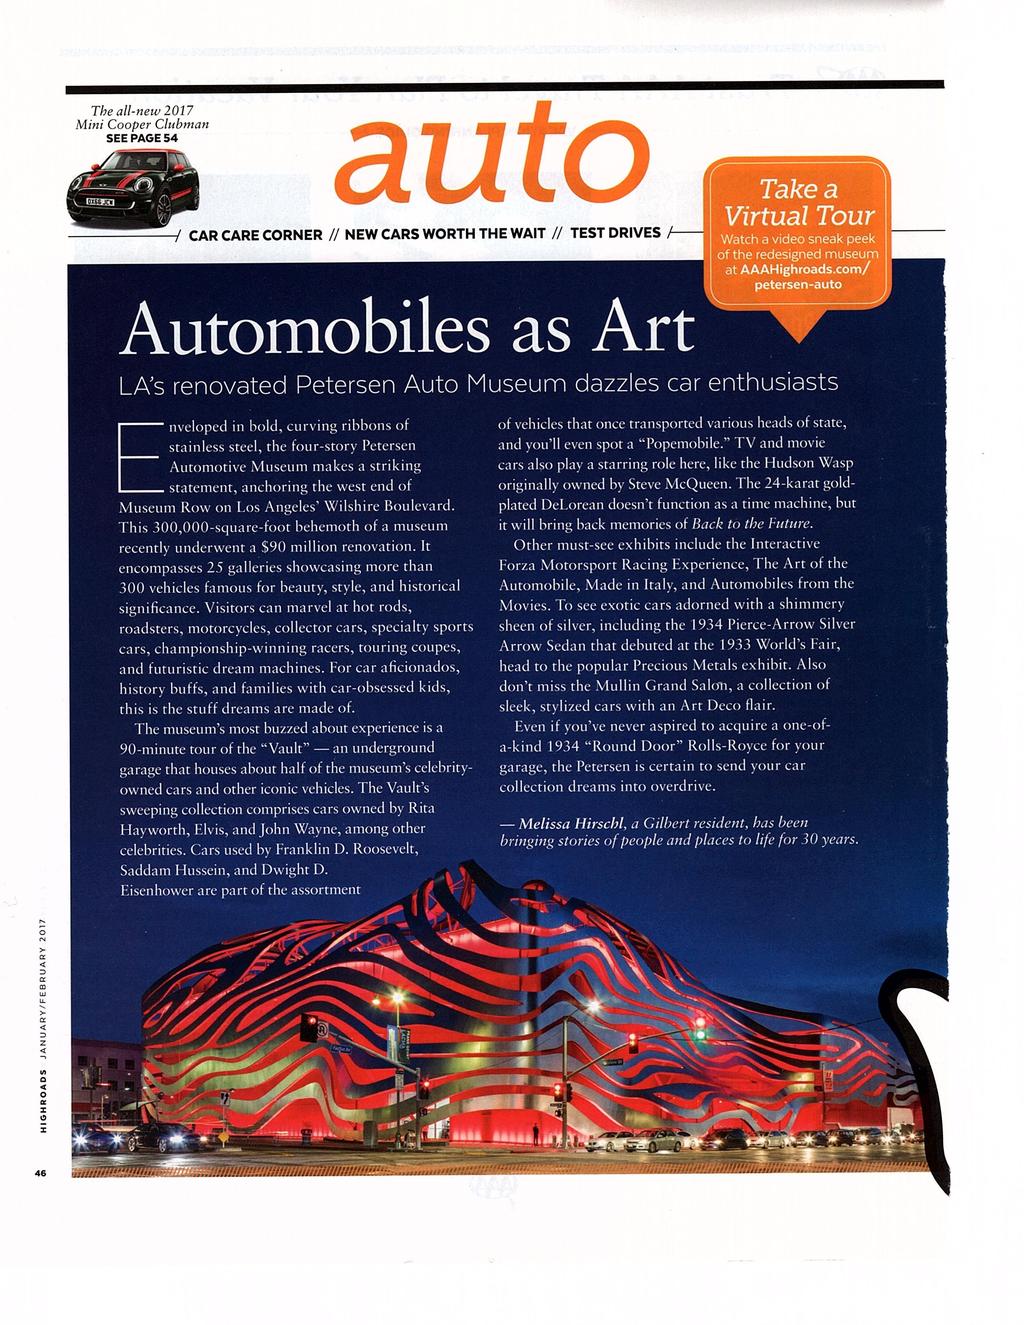 ROUTE 66 COURIER PAGE 6 PETERSEN AUTO MUSEUM UPDATE The following article was pulled from the January/February 2017 edition of AAA s HIGHROADS Magazine.